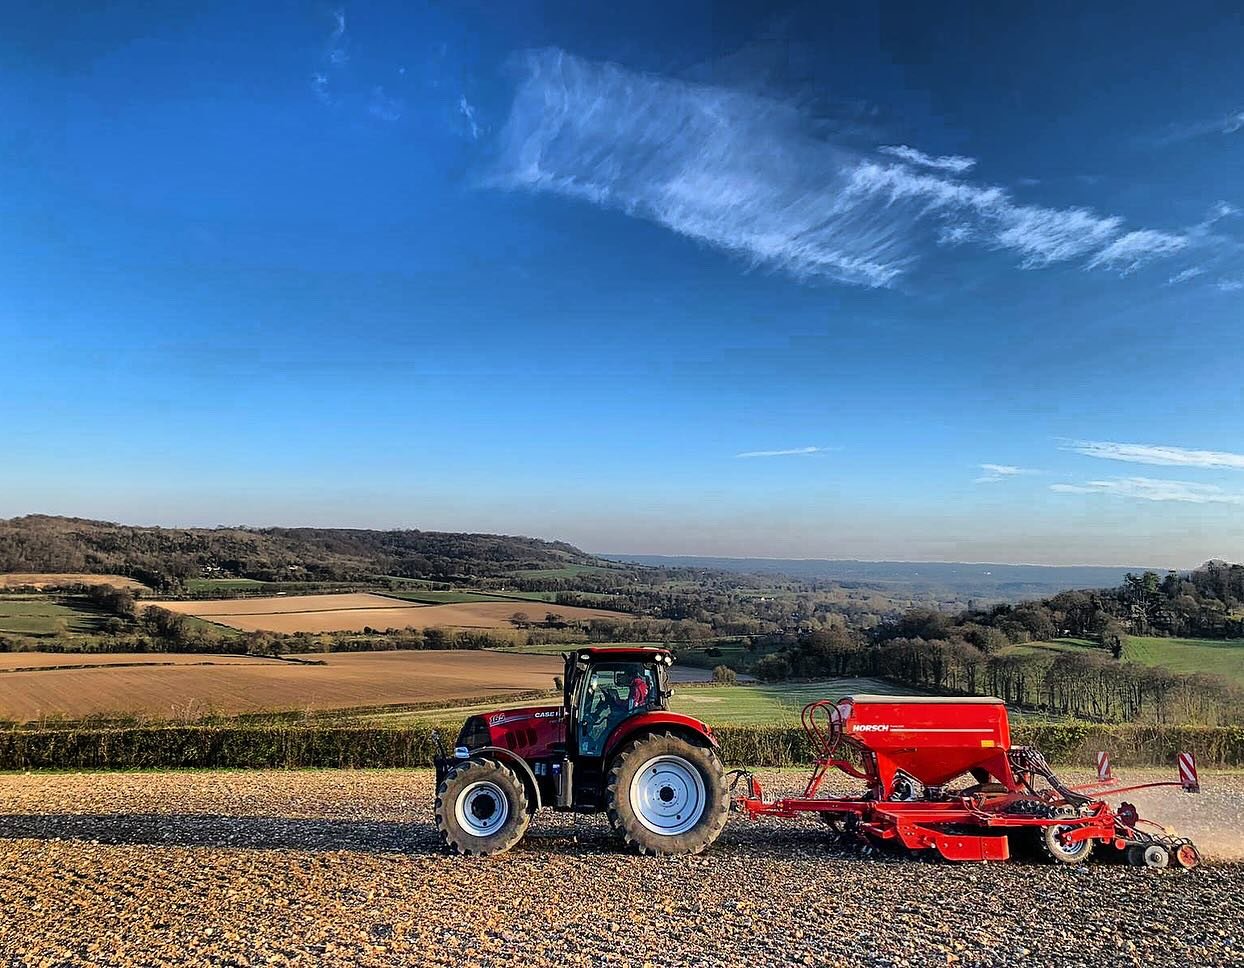 NEW FARM TOUR ✨🚜|| We are excited to offer a brand new way to experience a never before seen side of Castle Farm! 

🚜🌱 BEHIND THE SCENES TOUR - Saturday 25th May 2024 at 10:30am. Limited tickets available. 

Take a 1.5 hour leisurely tour of the m